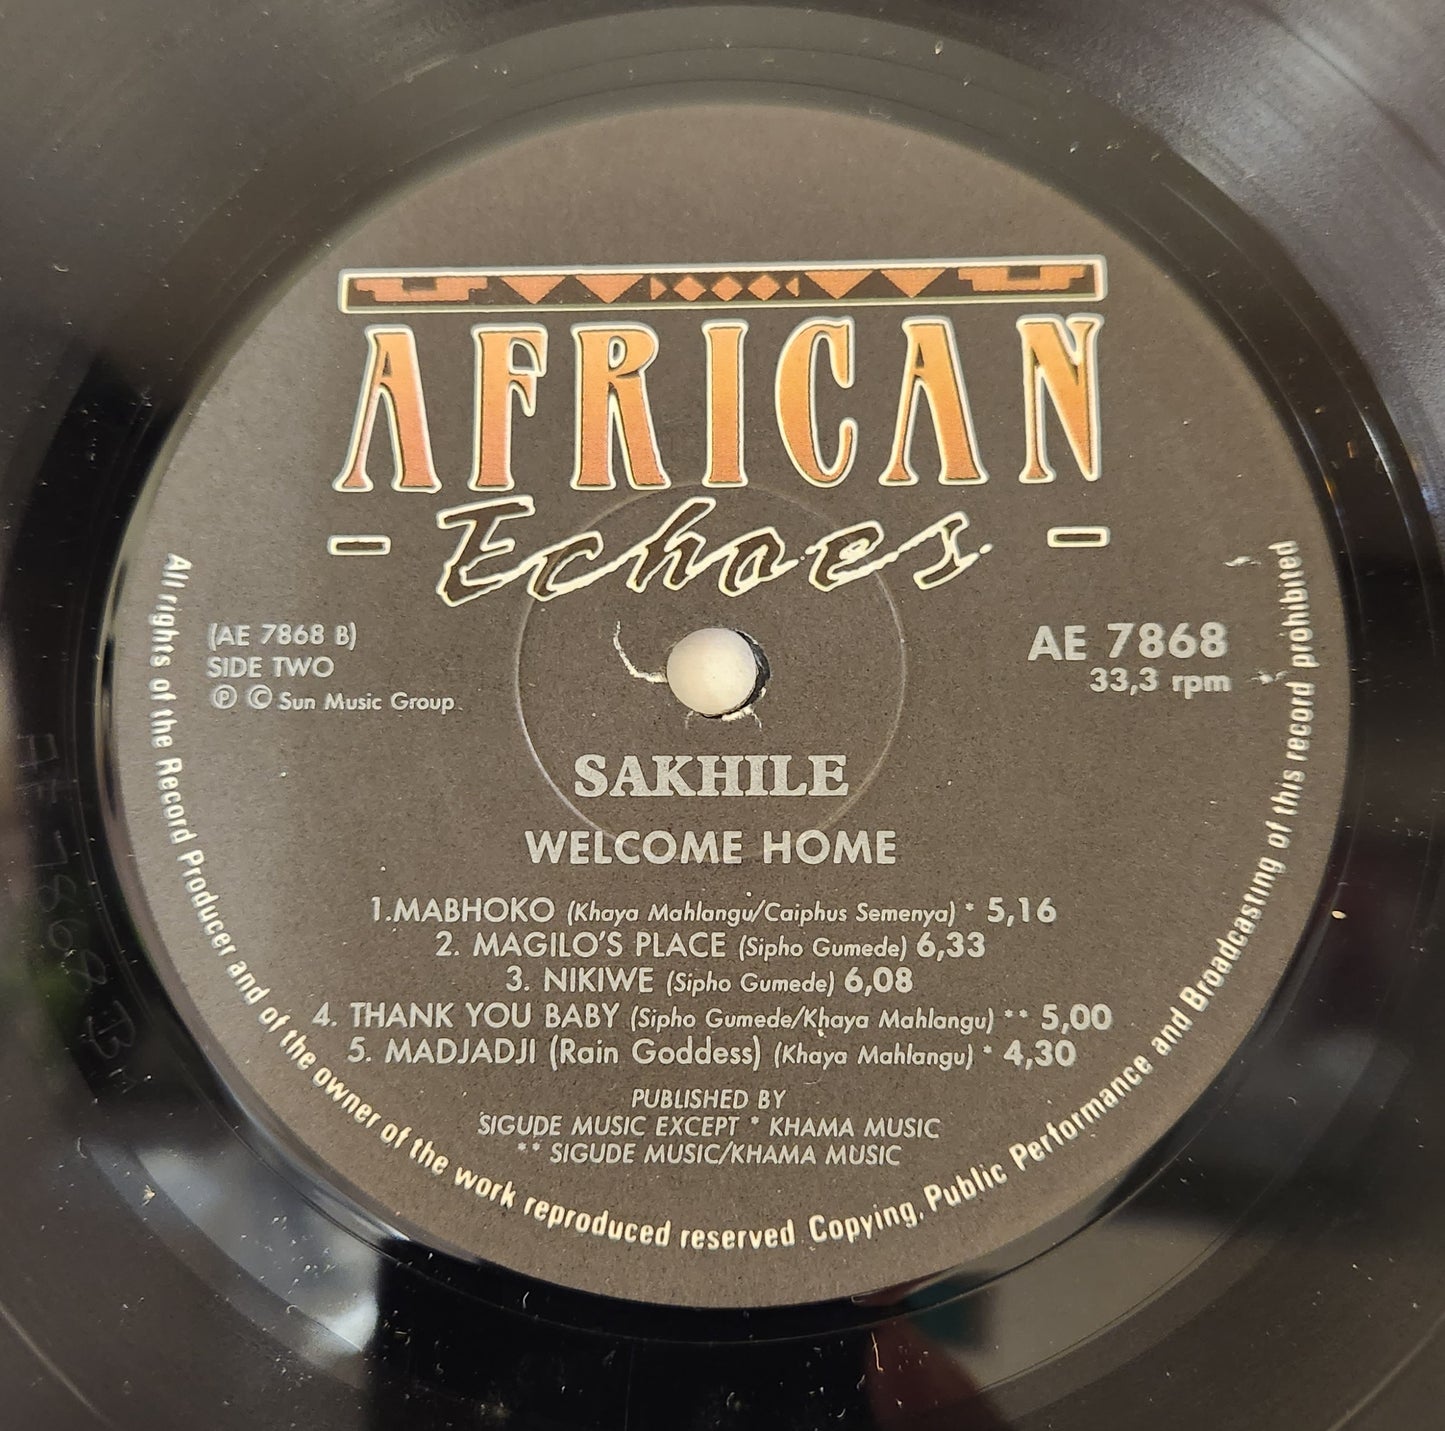 Sakhile "Welcome Home" 1992 South African Folk Record Album